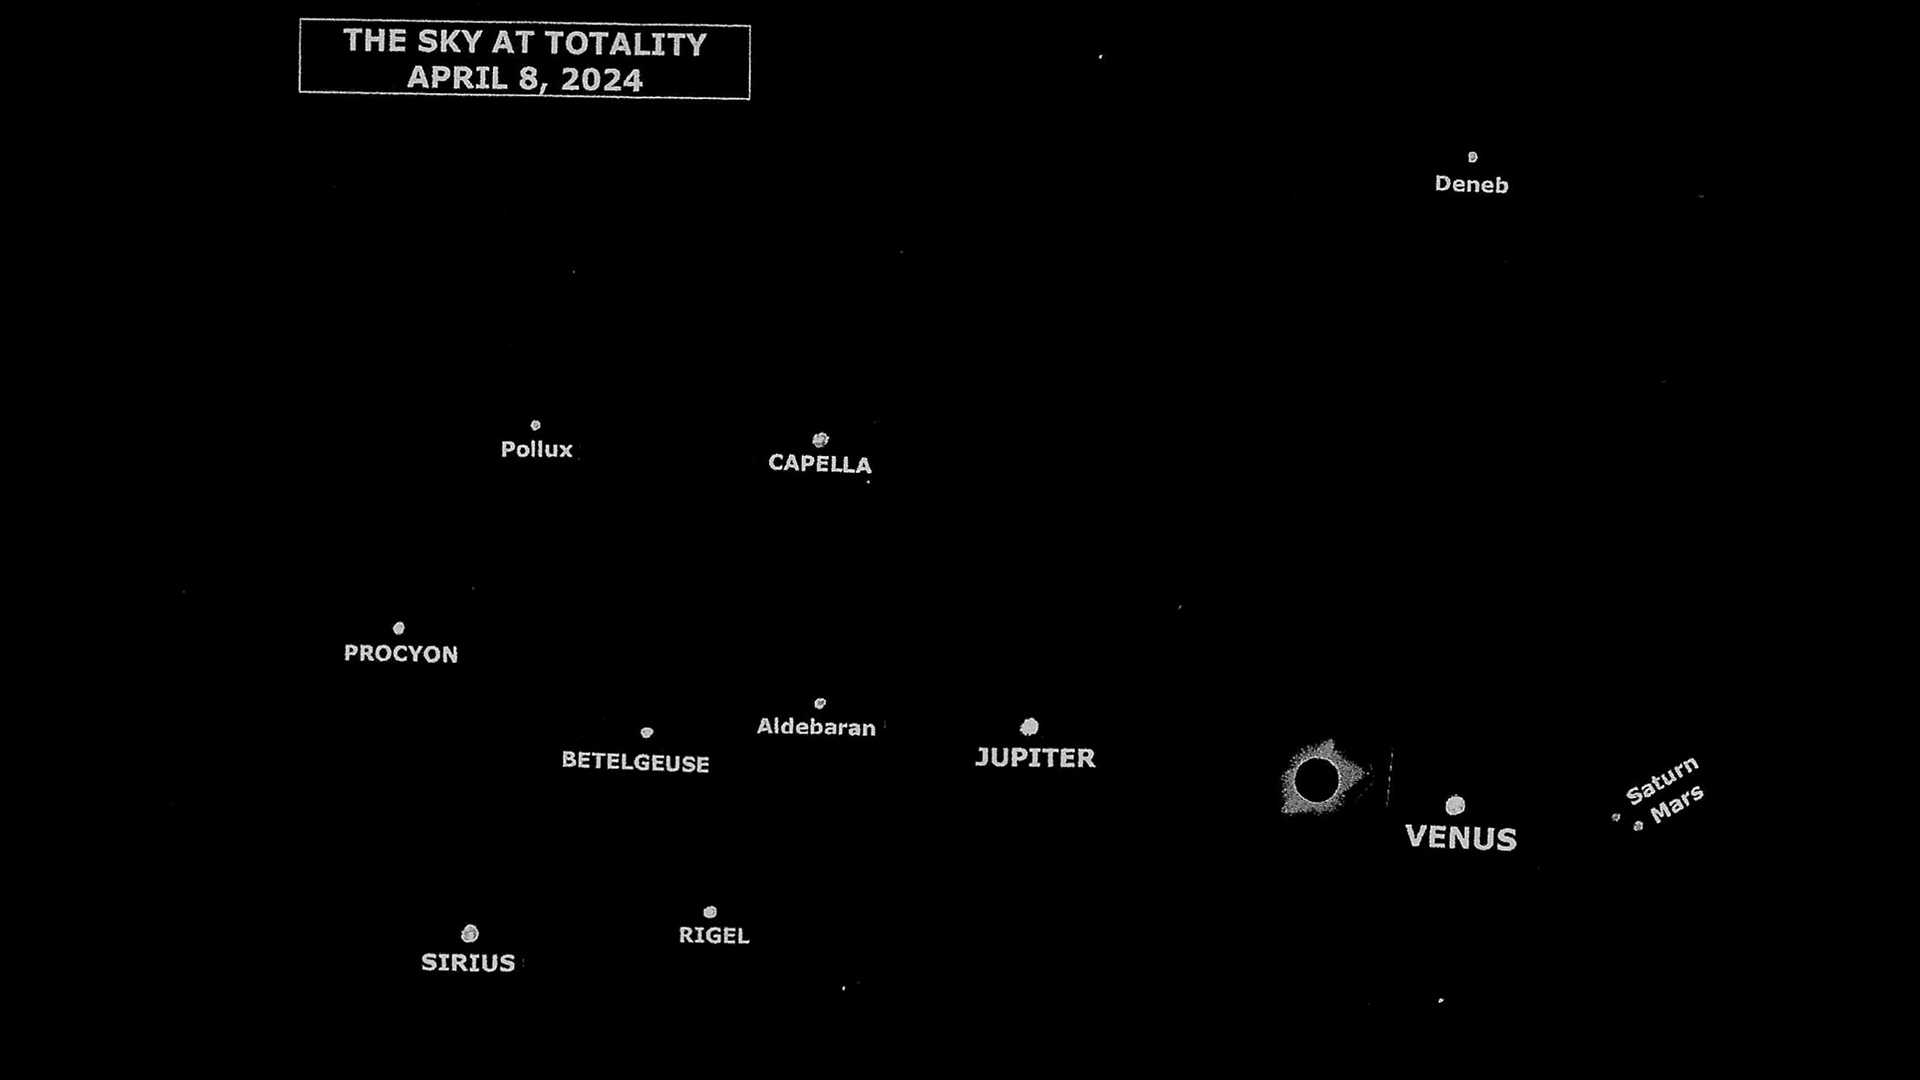 The sky chart shows the most conspicuous stars and planets that might be visible in the vicinity of the totally eclipsed sun.